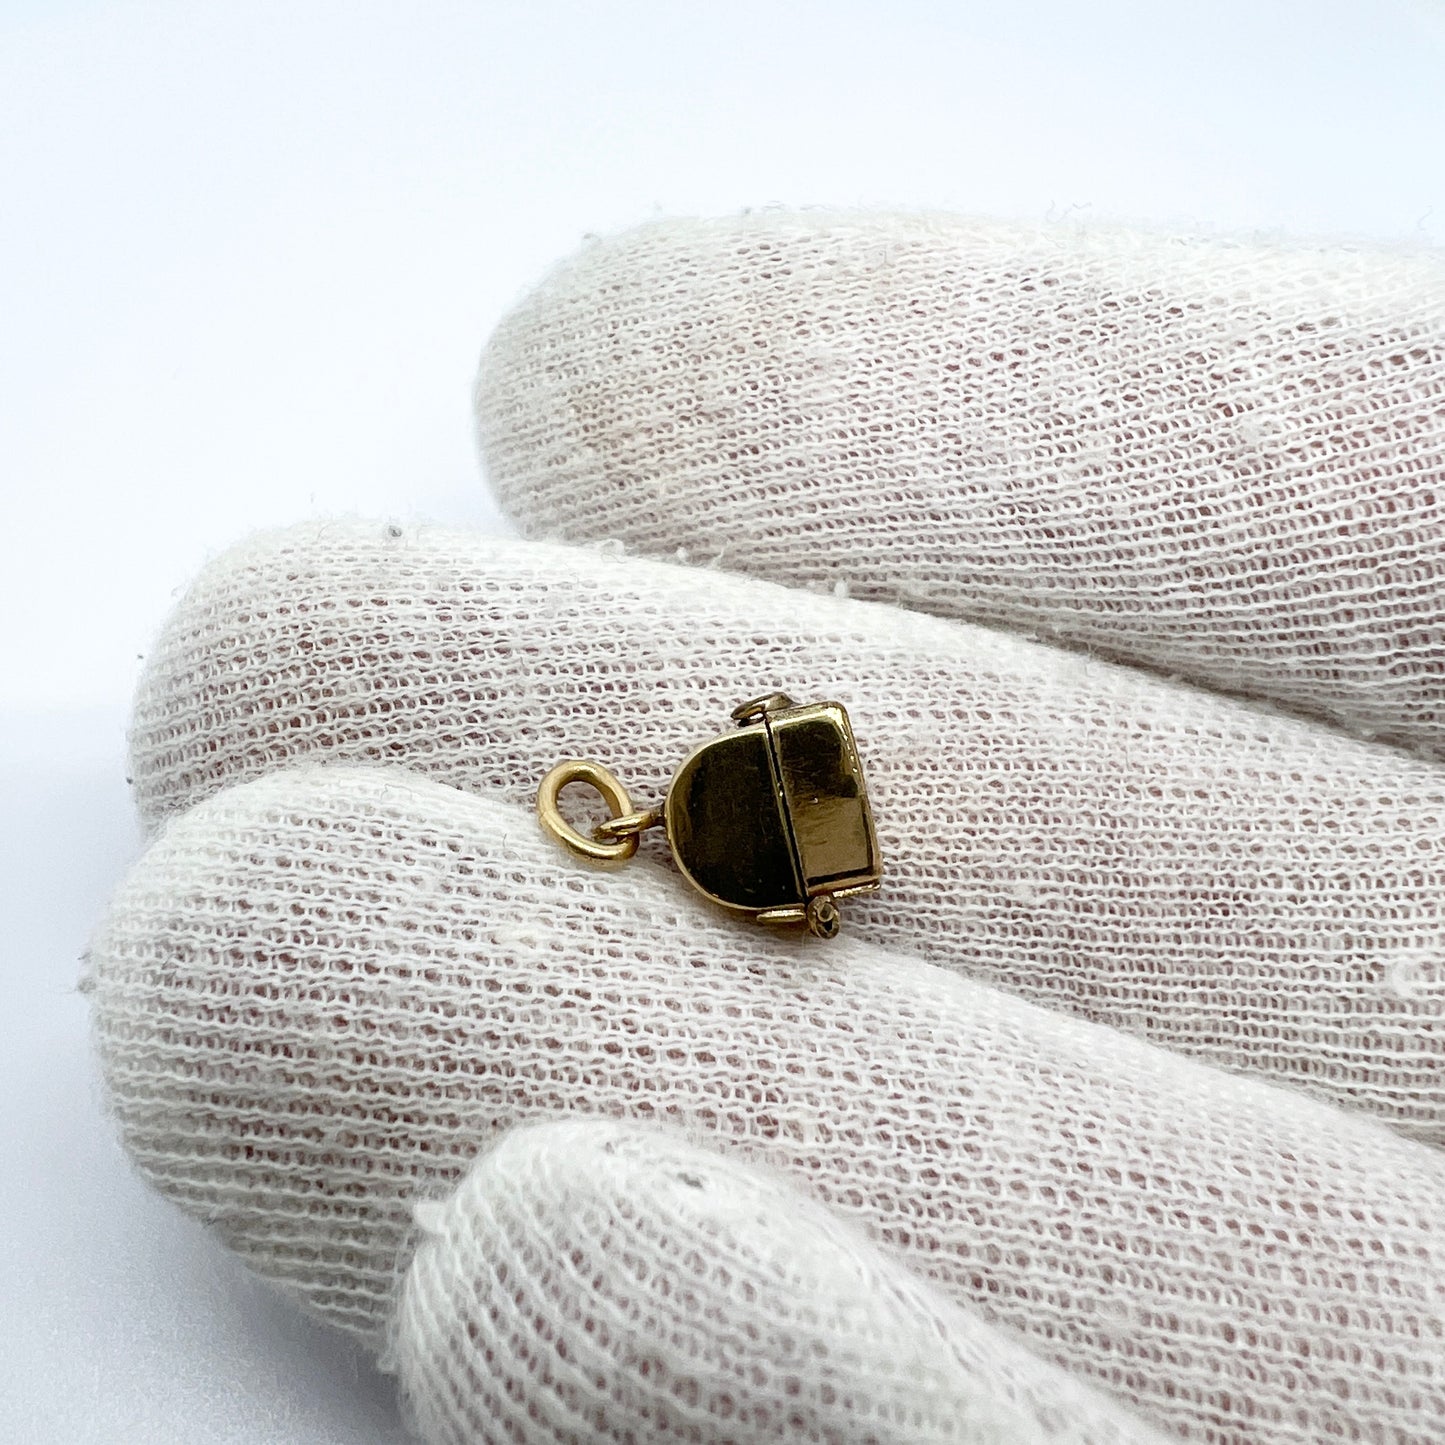 Wells, Vintage 12k Gold-filled Novelty Charm. Ring in Ring Box.